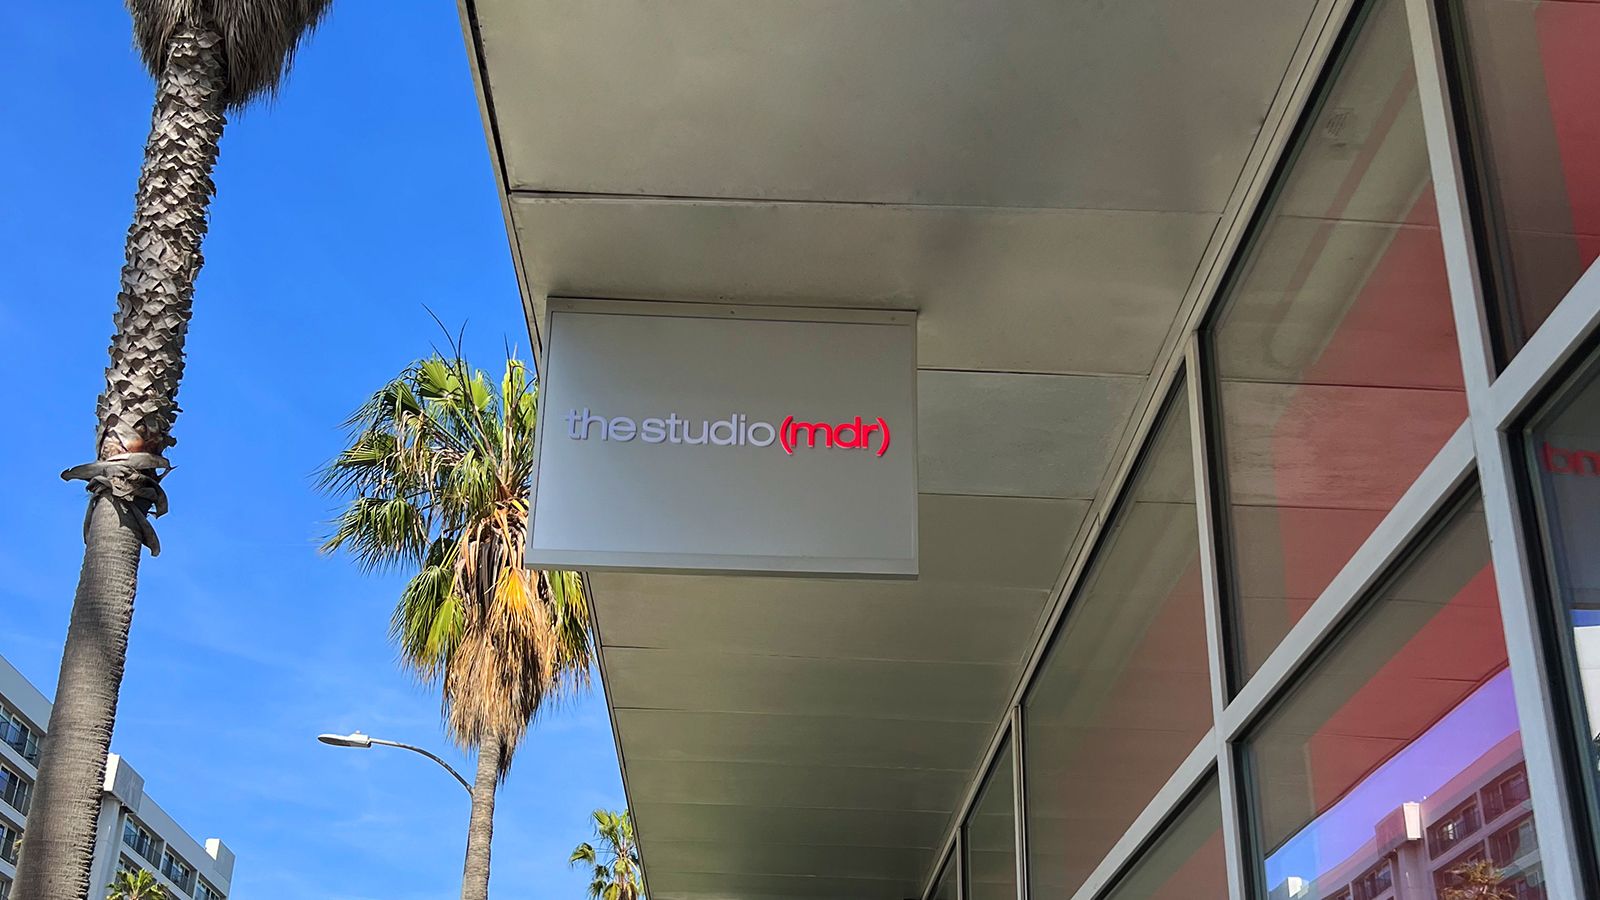 the studio mdr store signs